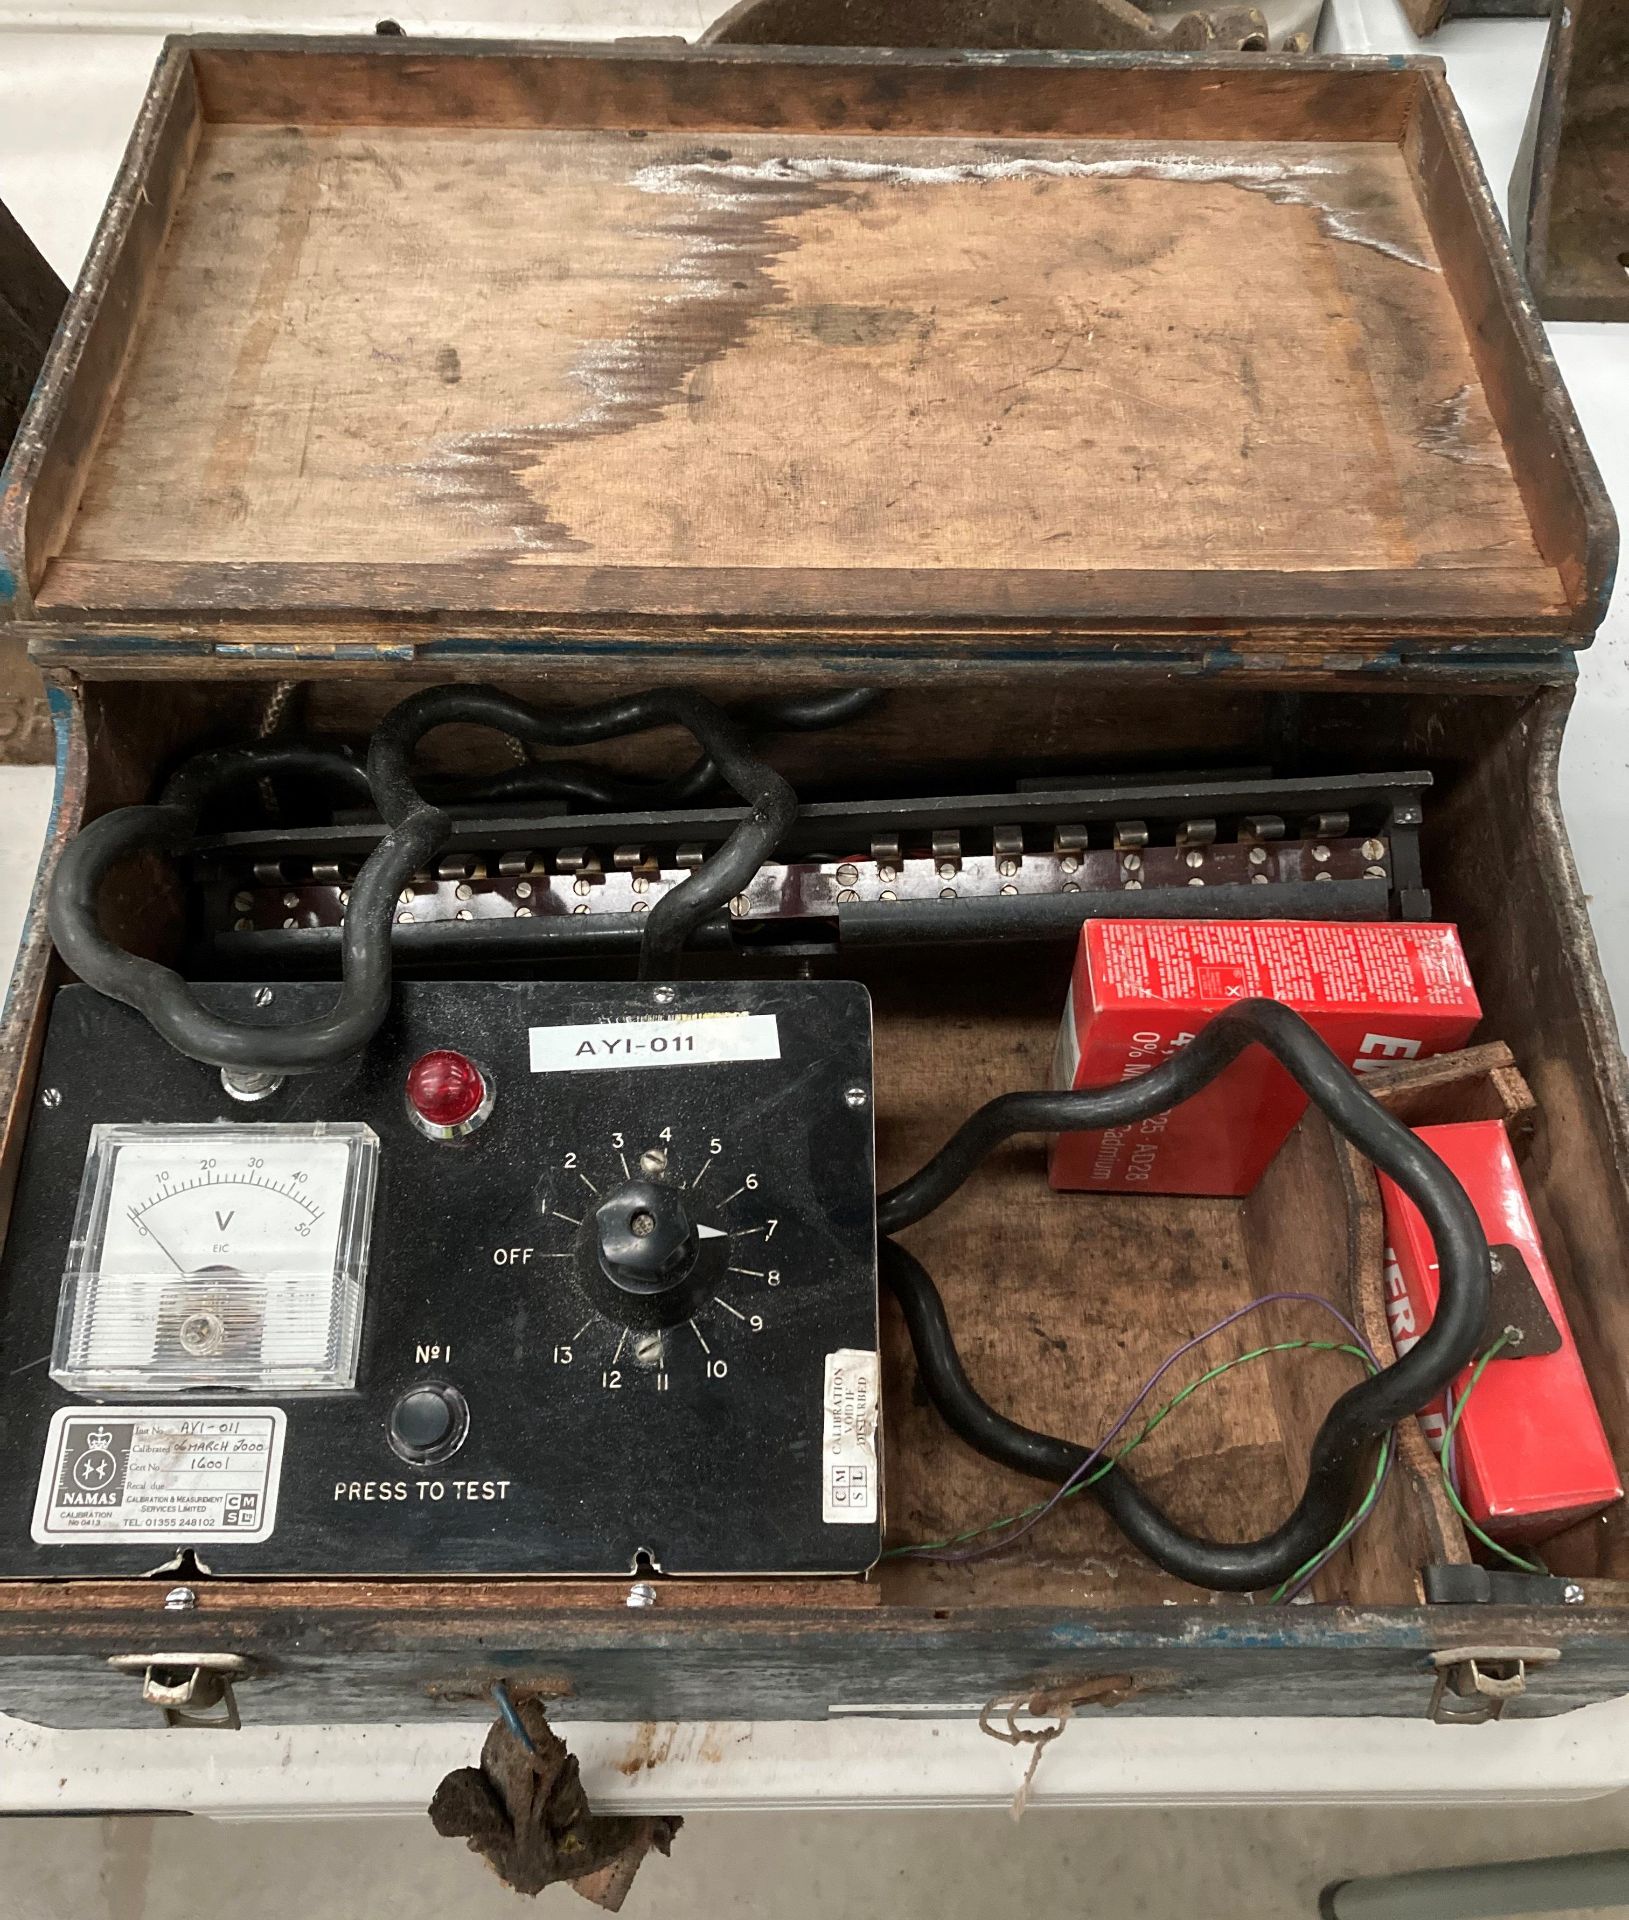 An A.W.S test rig in wooden box.